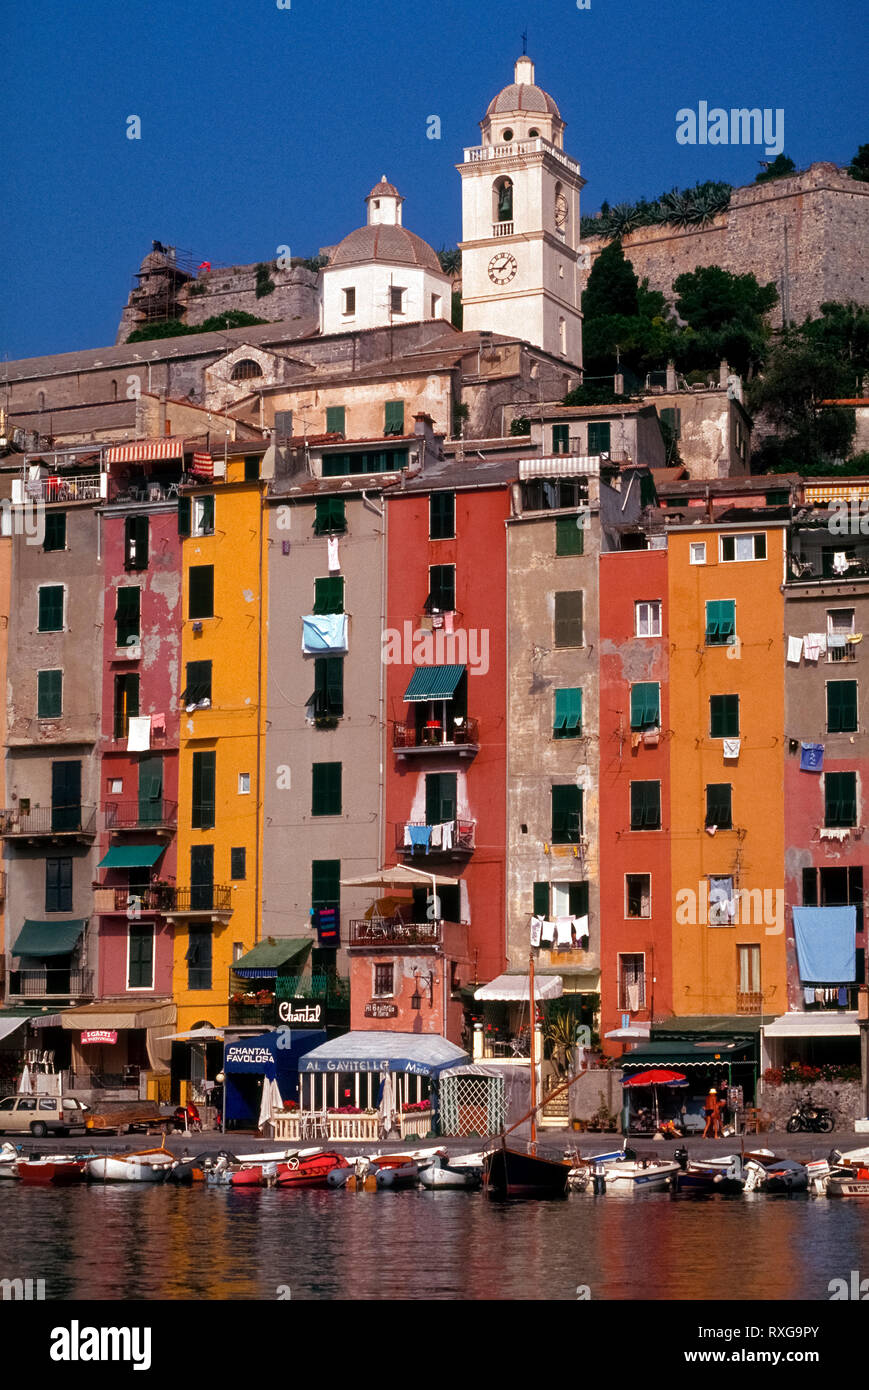 Multicolored facades marked by windows, shutters, balconies, and laundry hung out to dry decorate the vertical dwellings that overlook the boat harbor at Portovenere, Italy. Strong sunshine along the Mediterranean seacoast is a cause for frequent repainting of the exterior walls of these attached residences. This medieval fishing village on the Italian Riviera is among the most picturesque but lesser-known tourist towns in the Liguria region. Stock Photo